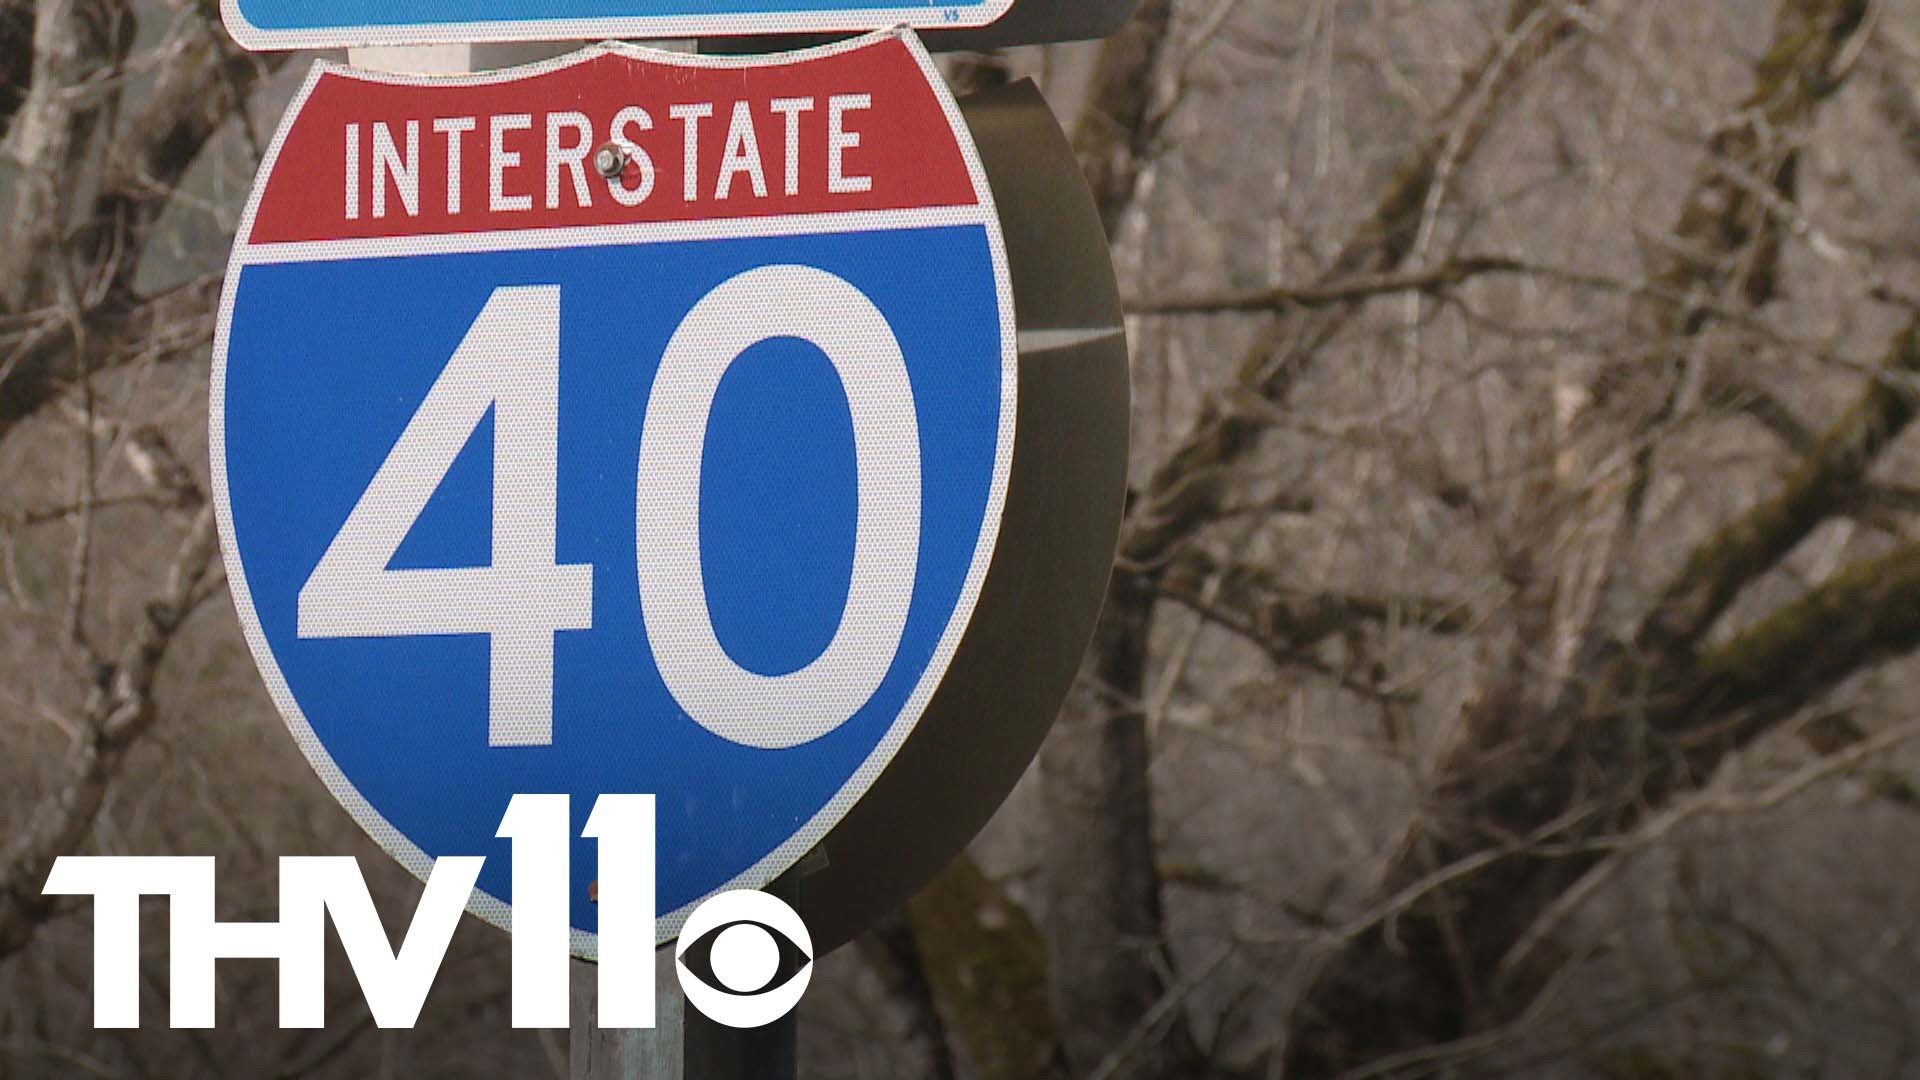 Due to ramp reconstruction work in North Little Rock set to begin soon, I-40 eastbound will be closed for the weekend beginning on Friday night.